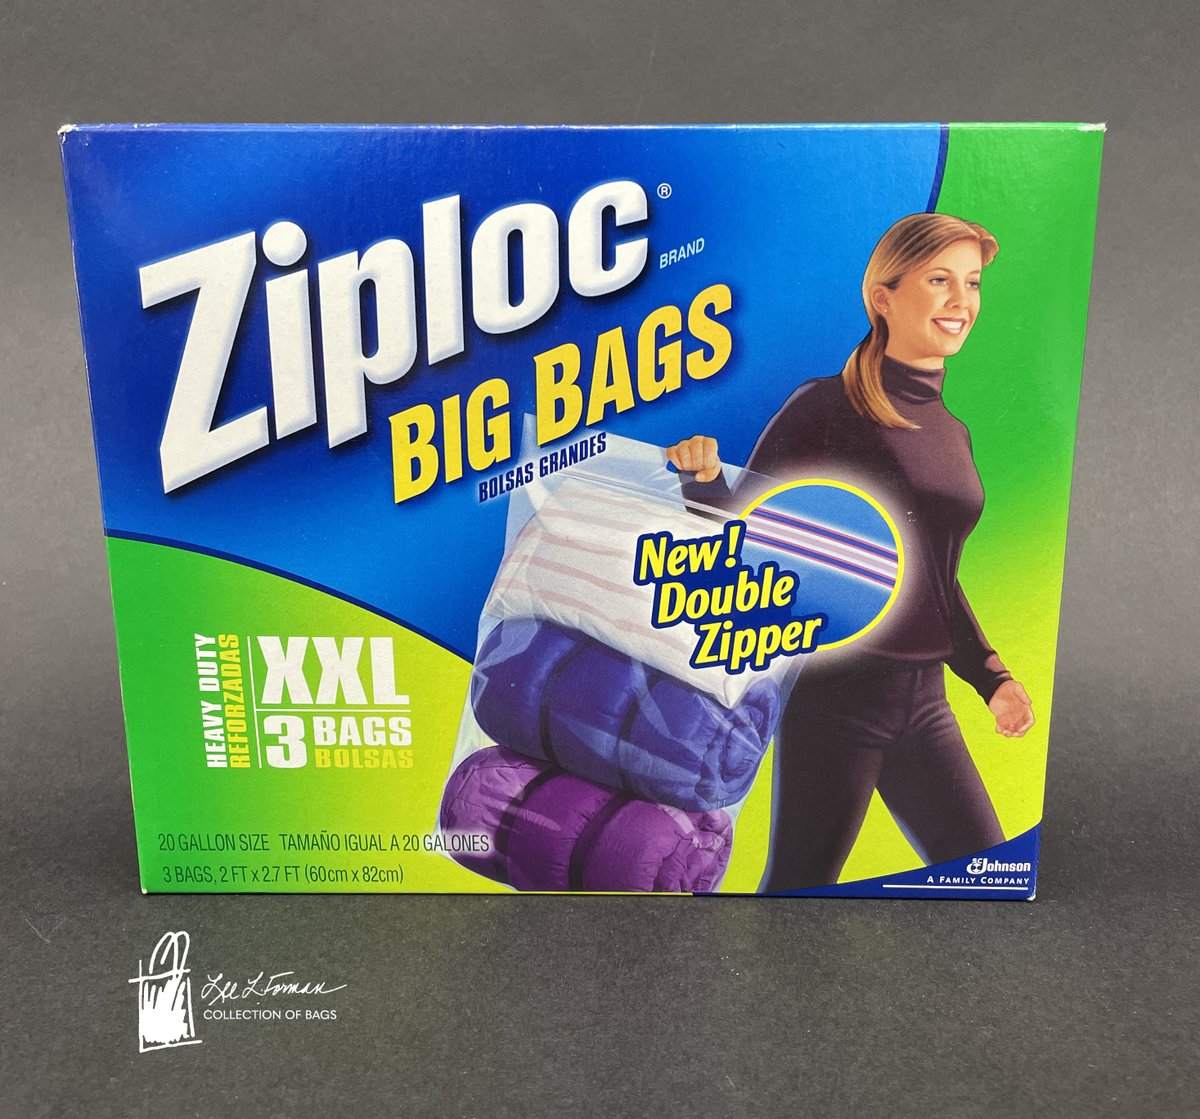 162/365: Did you know Ziploc bags are the result of international invention? Danish designer Borge Madsen made the plastic zipper, Romanian inventor Steven Ausnit created the press-and-seal, & the Japanese company Seisan Nihon Sha manufactured the zipper on the bag.